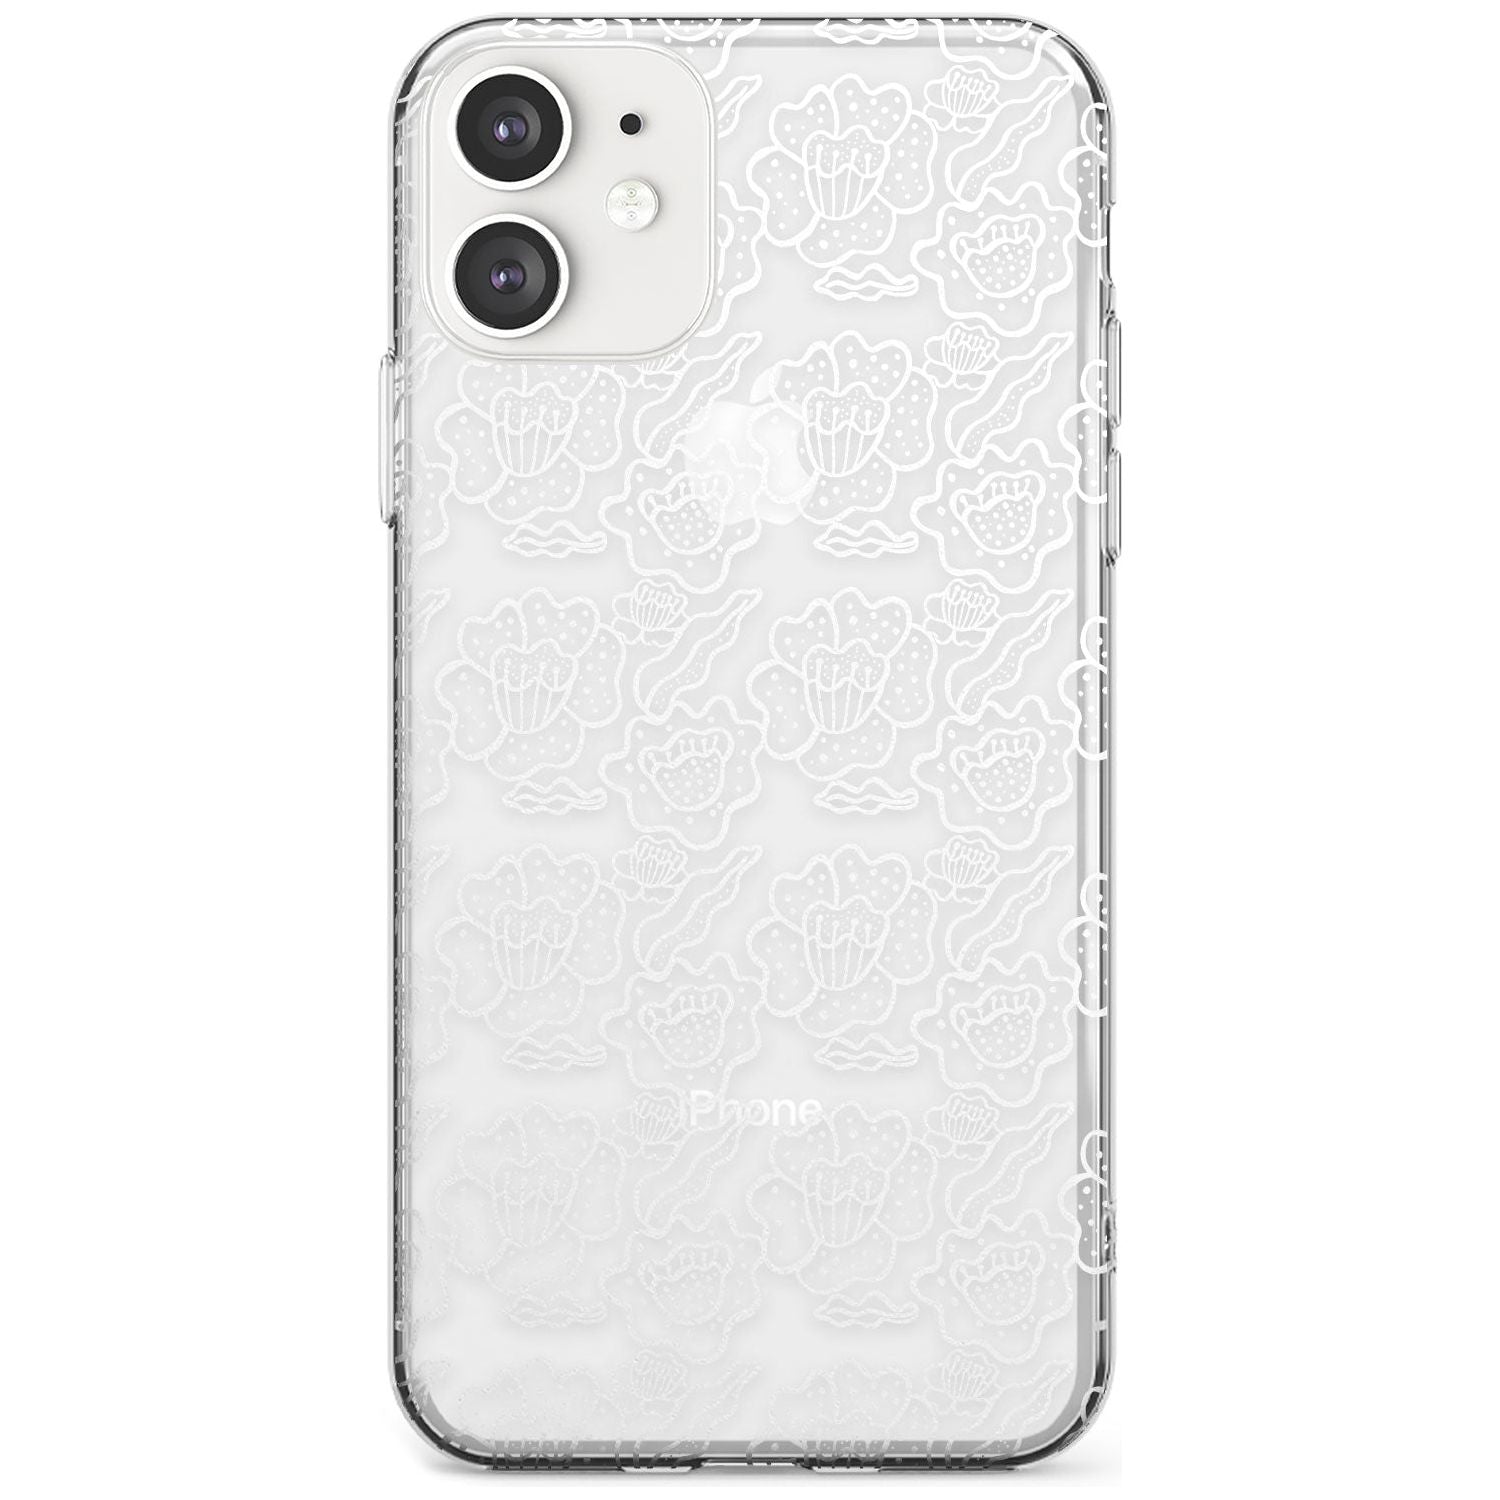 Funky Floral Patterns White on Clear Slim TPU Phone Case for iPhone 11